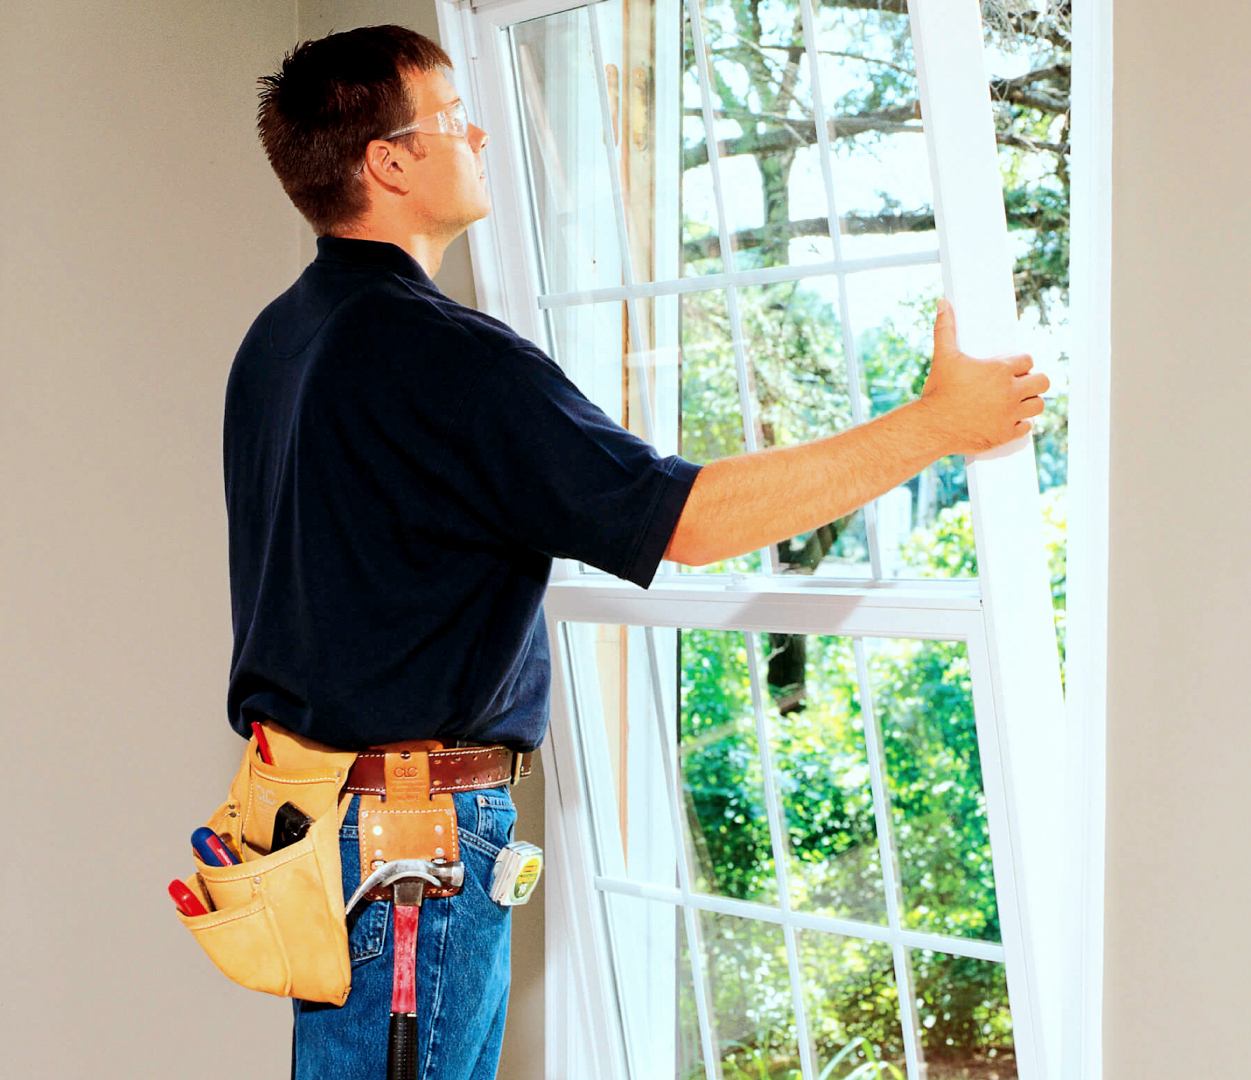 Handyman services are easily available for windows-installation works.